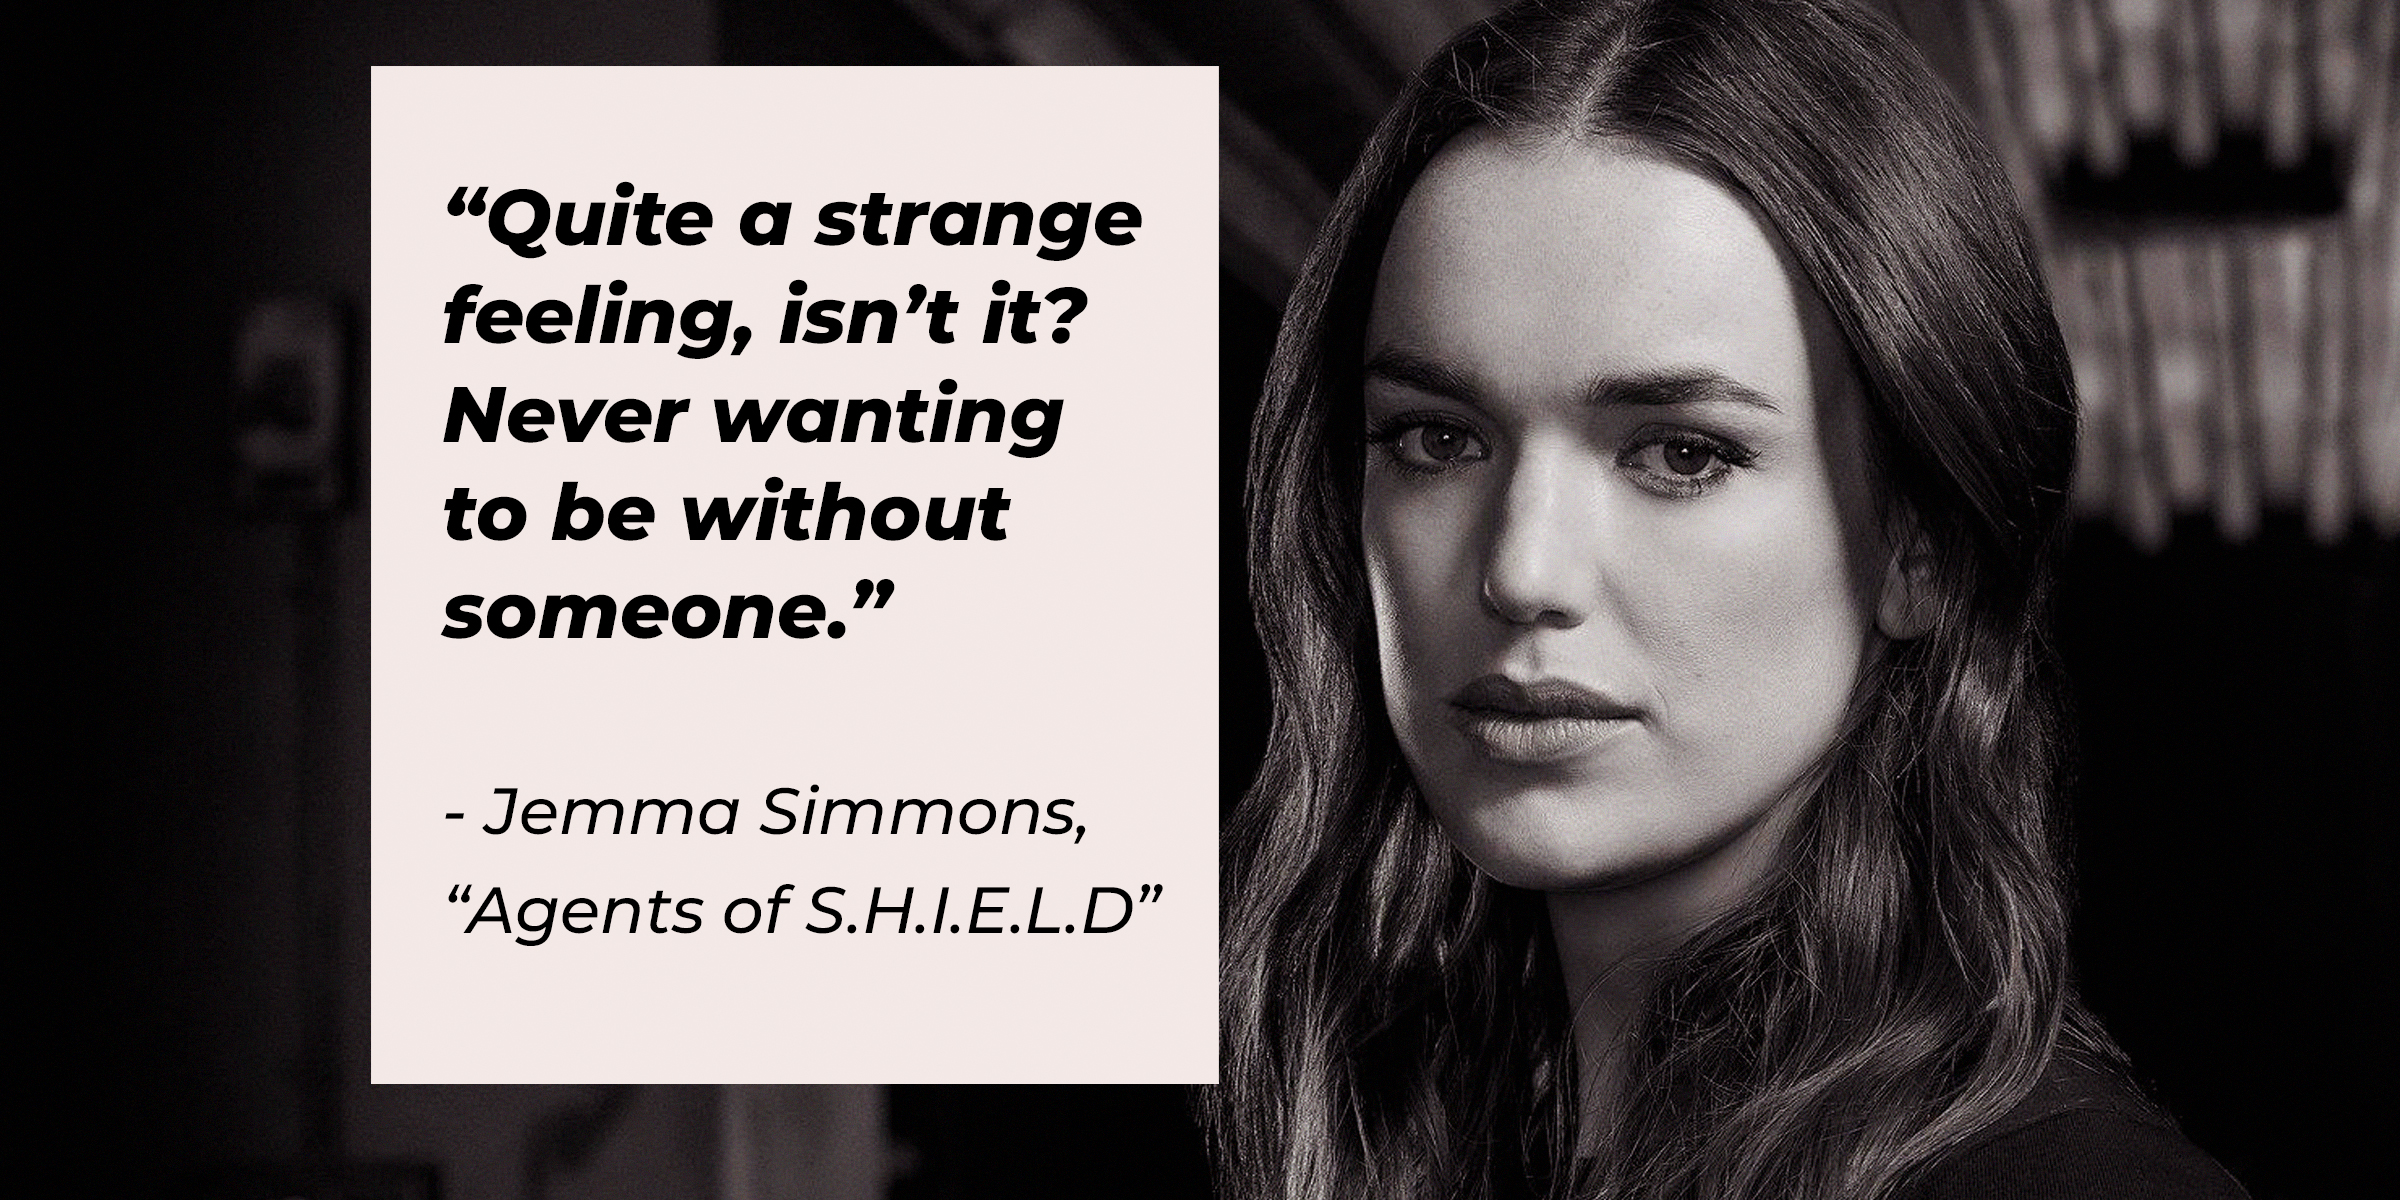 Jemma Simmons with her quote from "Agents of S.H.I.E.L.D.:" "Quite a strange feeling, isn’t it? Never wanting to be without someone.” | Source: Facebook.com/AgentsofShield